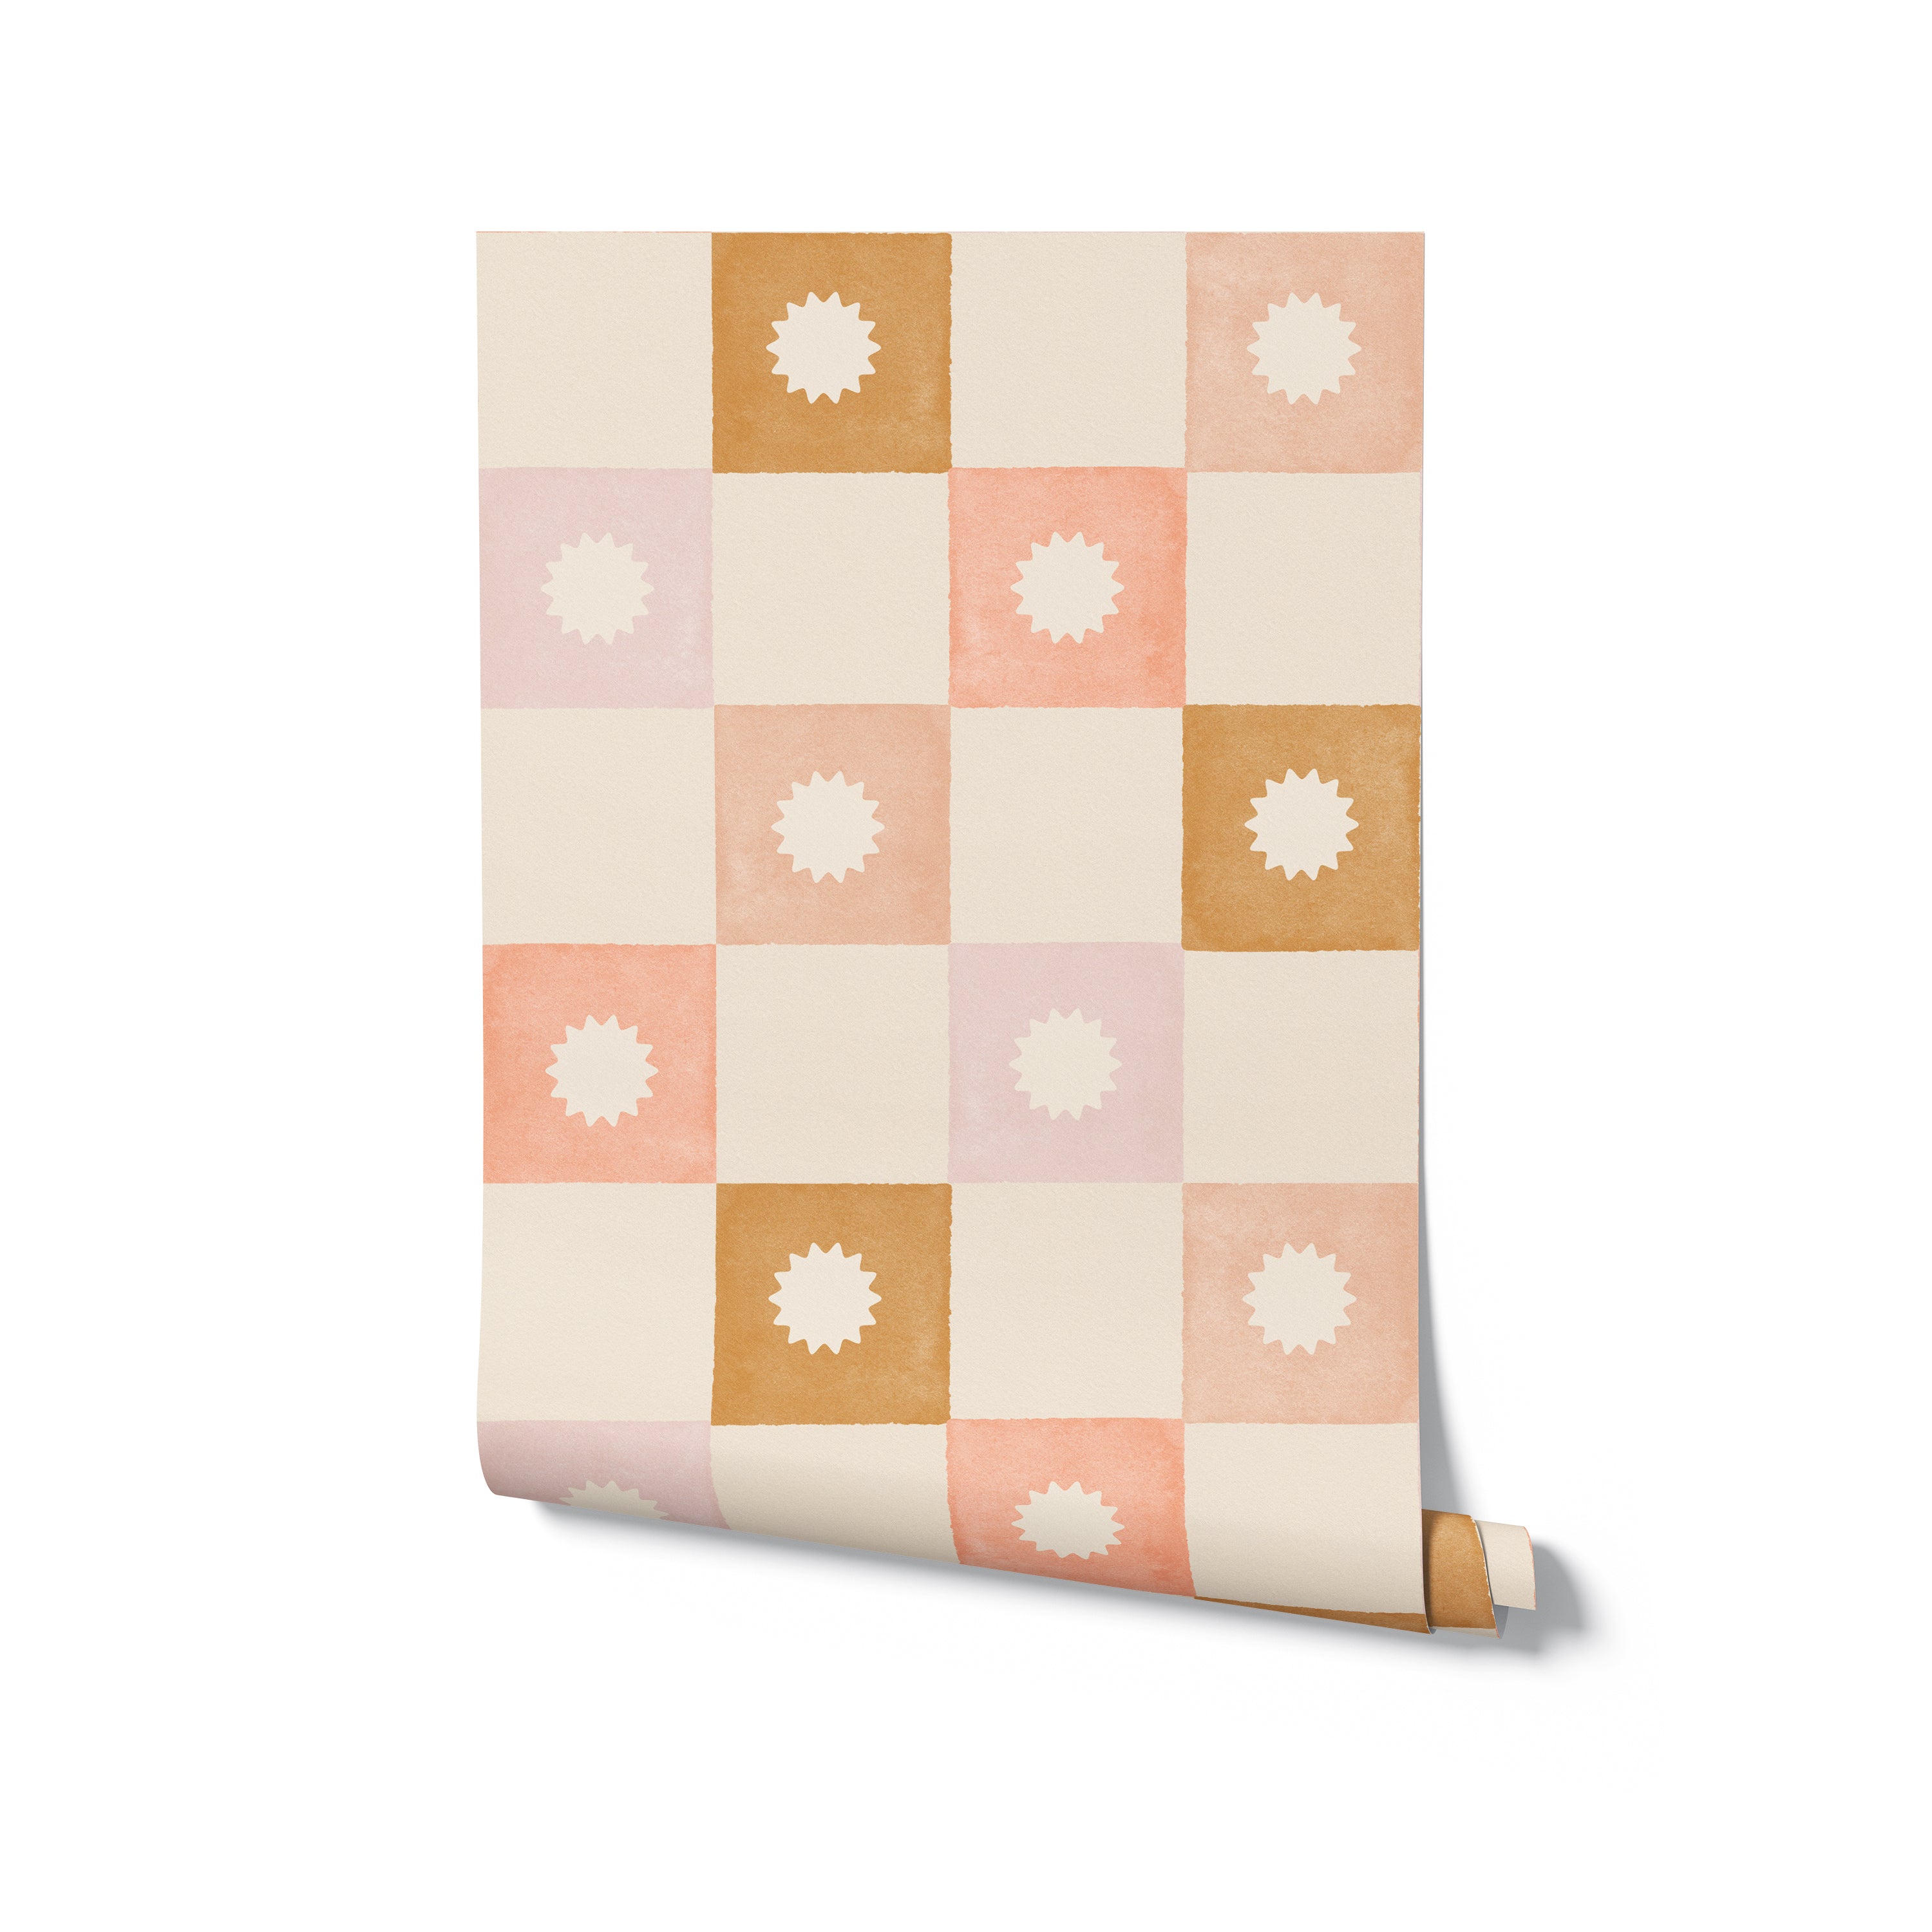 A roll of Coralie Wallpaper revealing its charming pattern of pastel peach, beige, and gold squares with decorative centers, ideal for adding a soft, warm touch to any room’s decor.